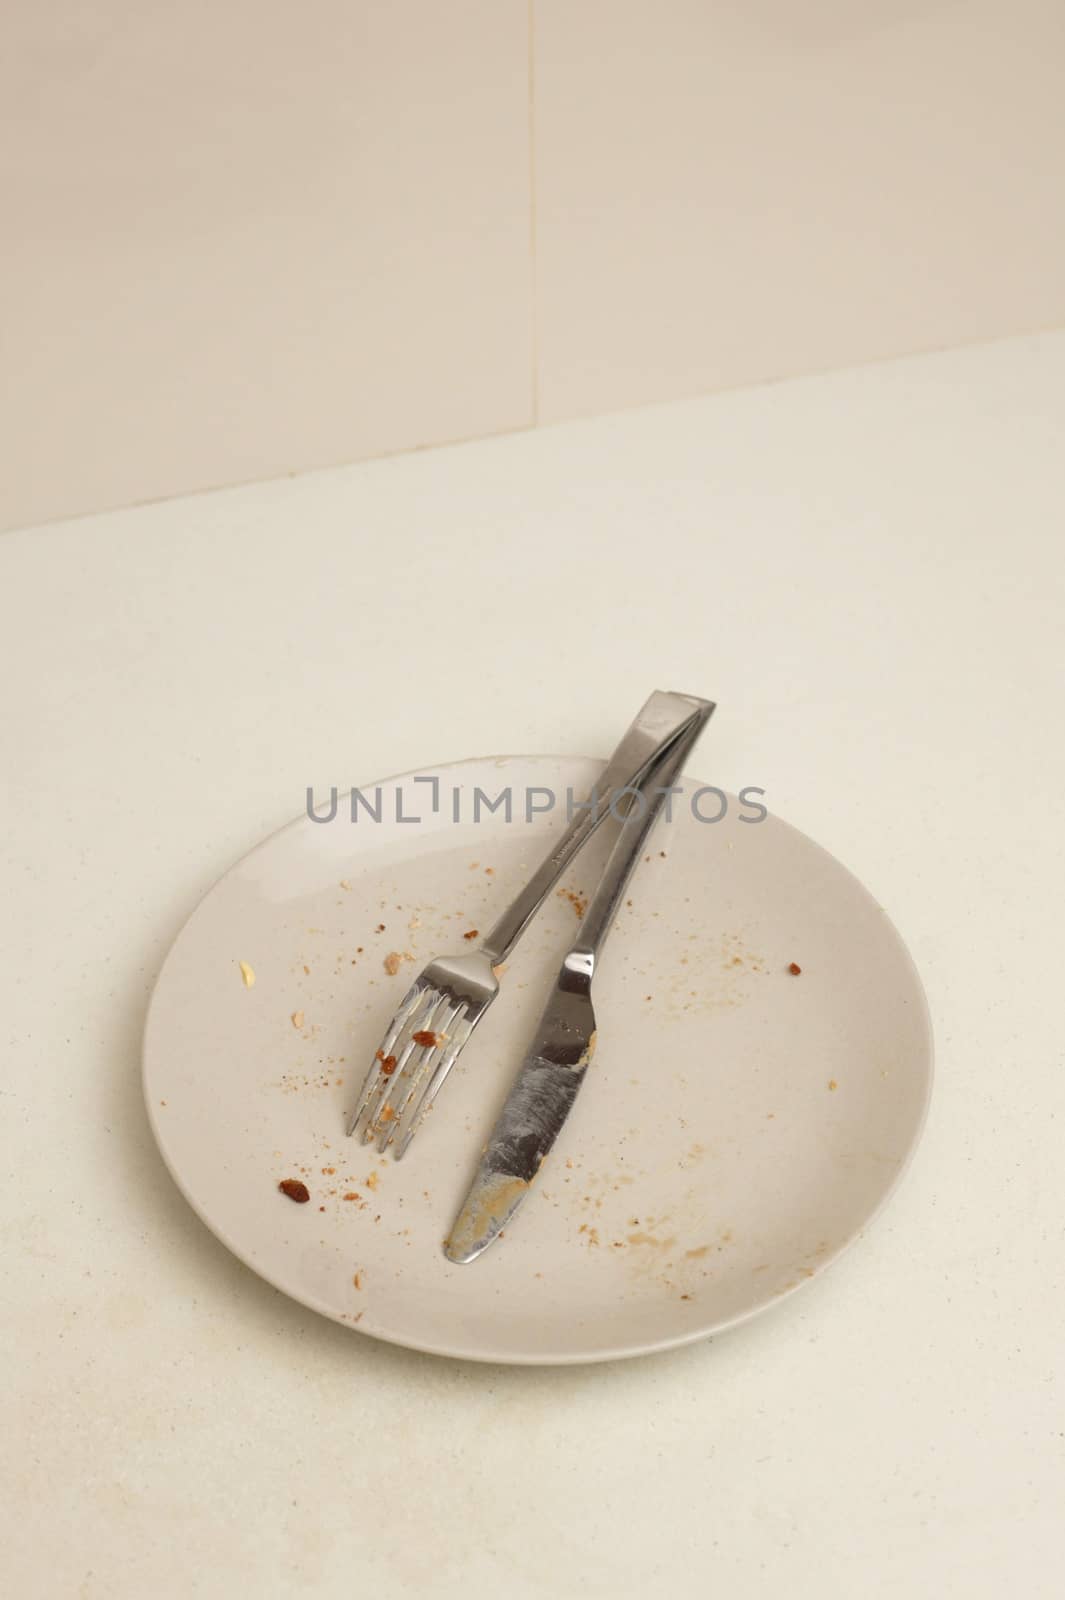 A dinner plate isolated on a kitch bench